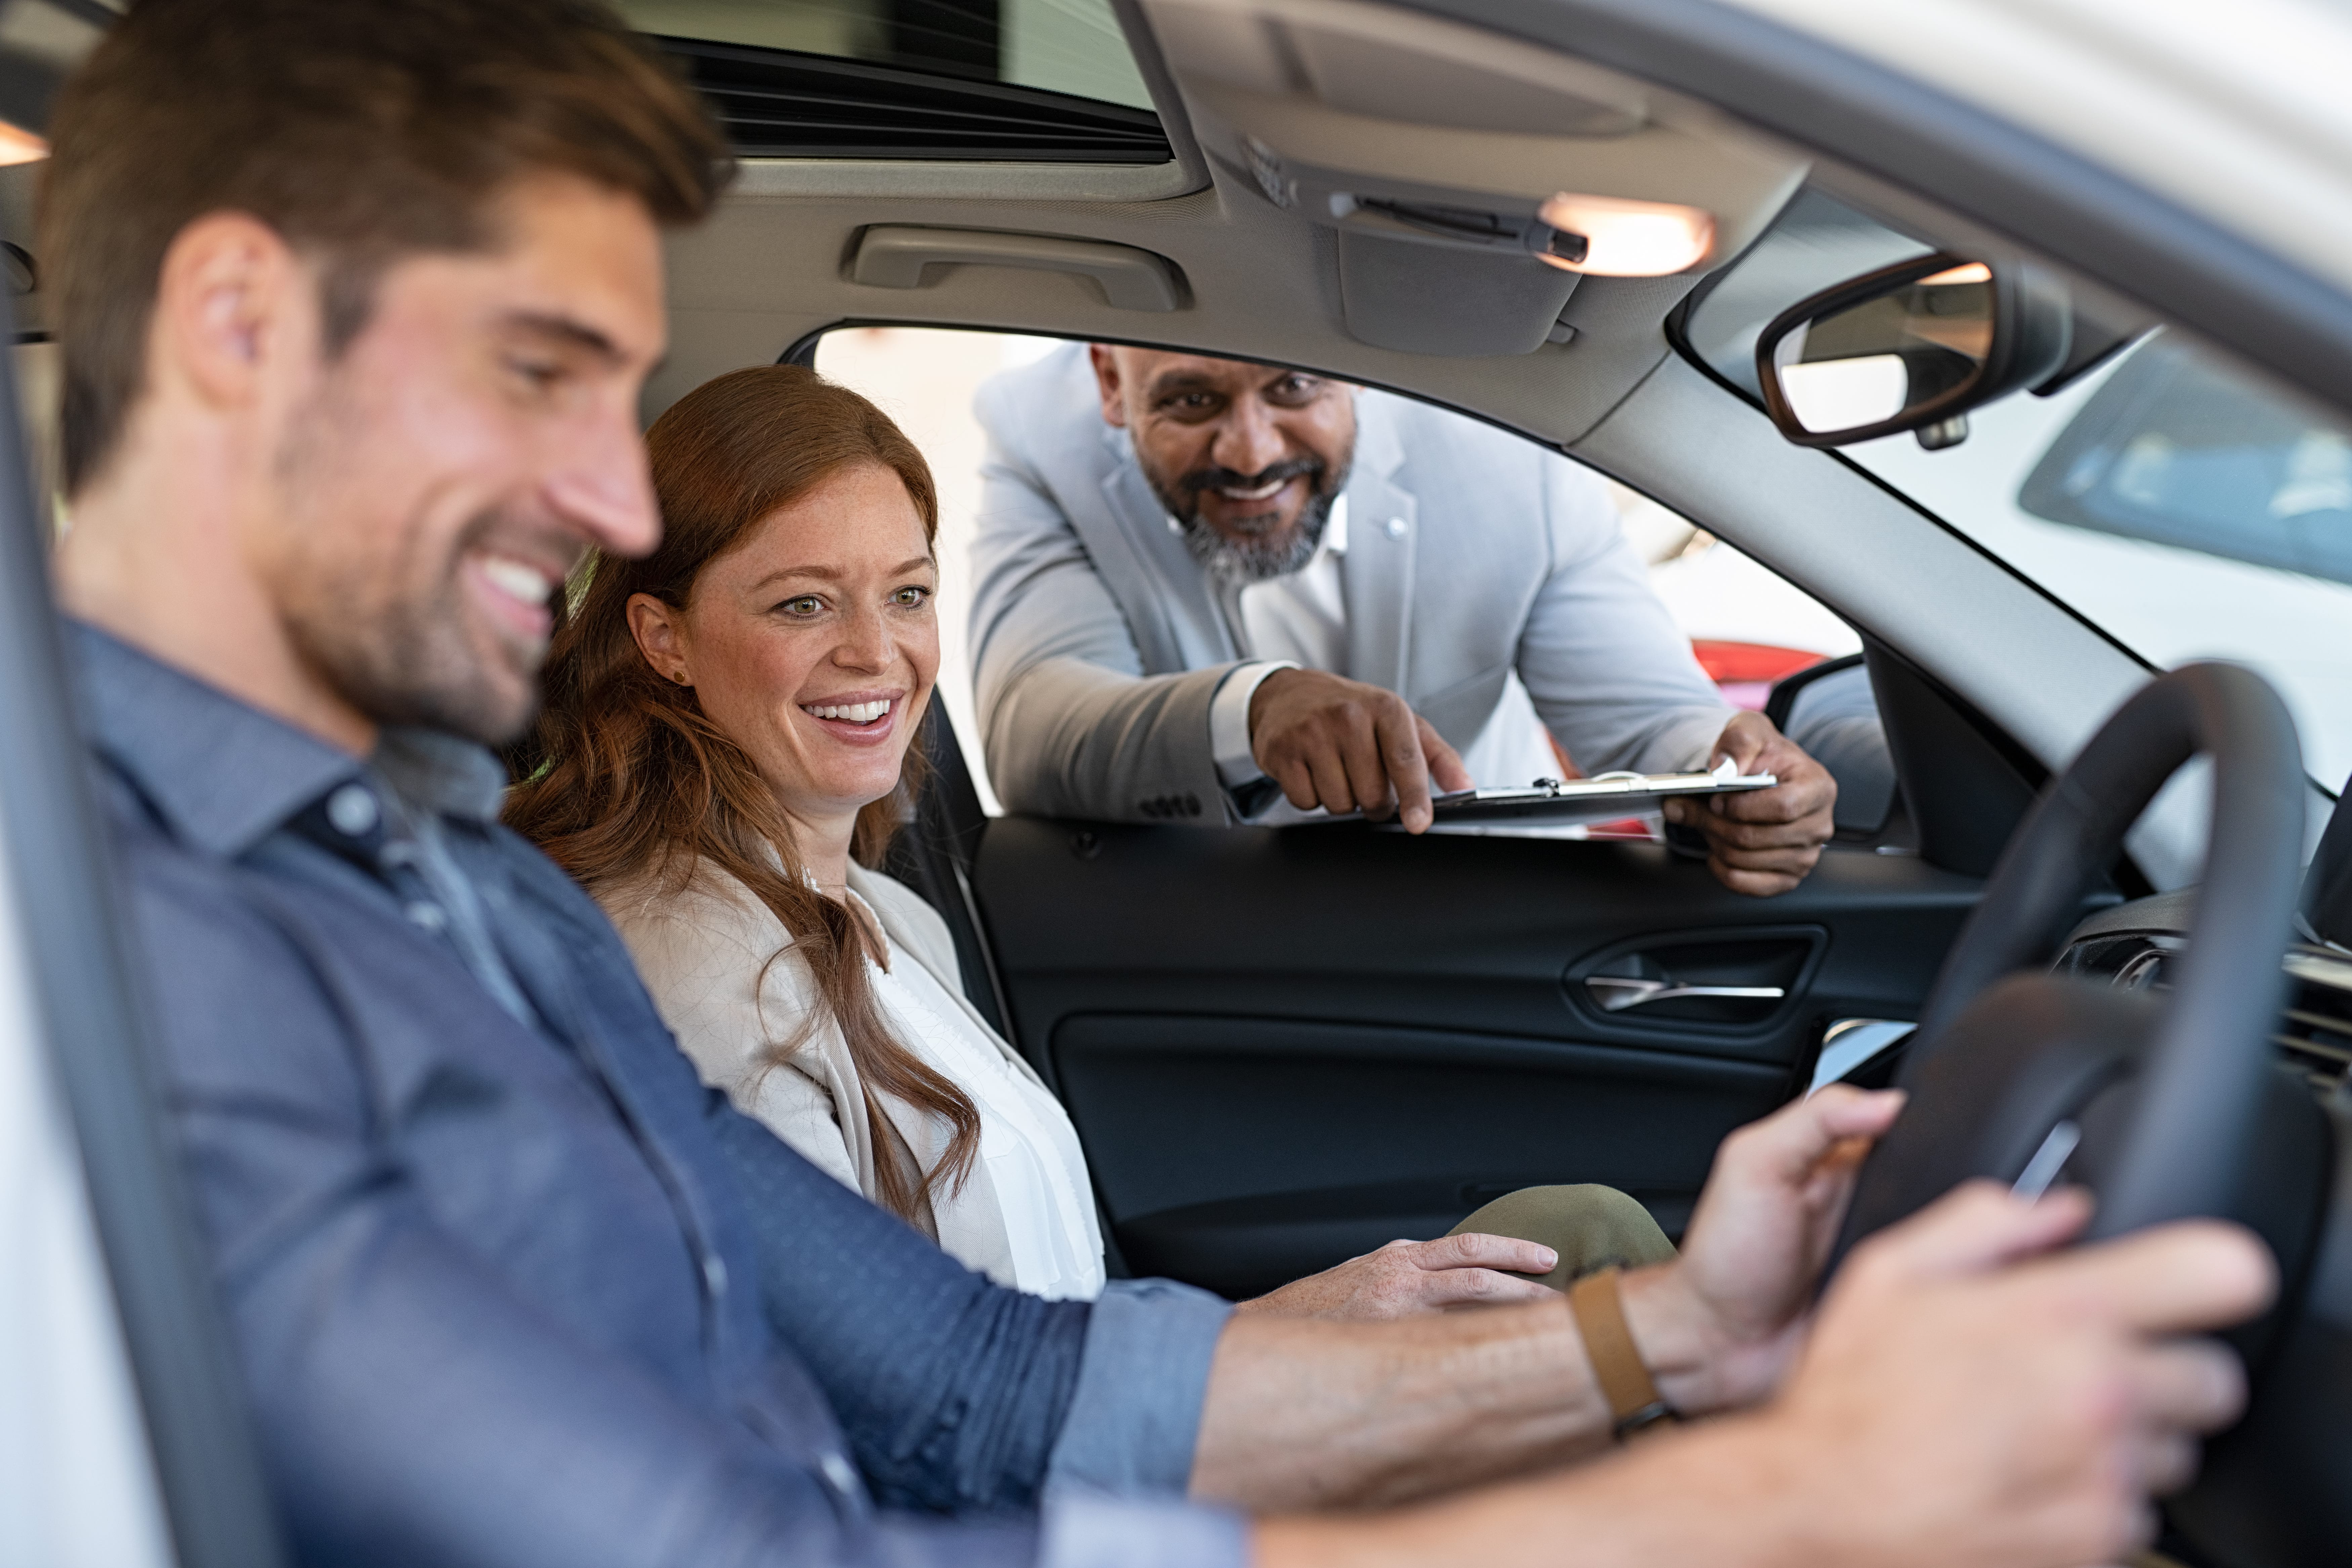 Used car test drive tips